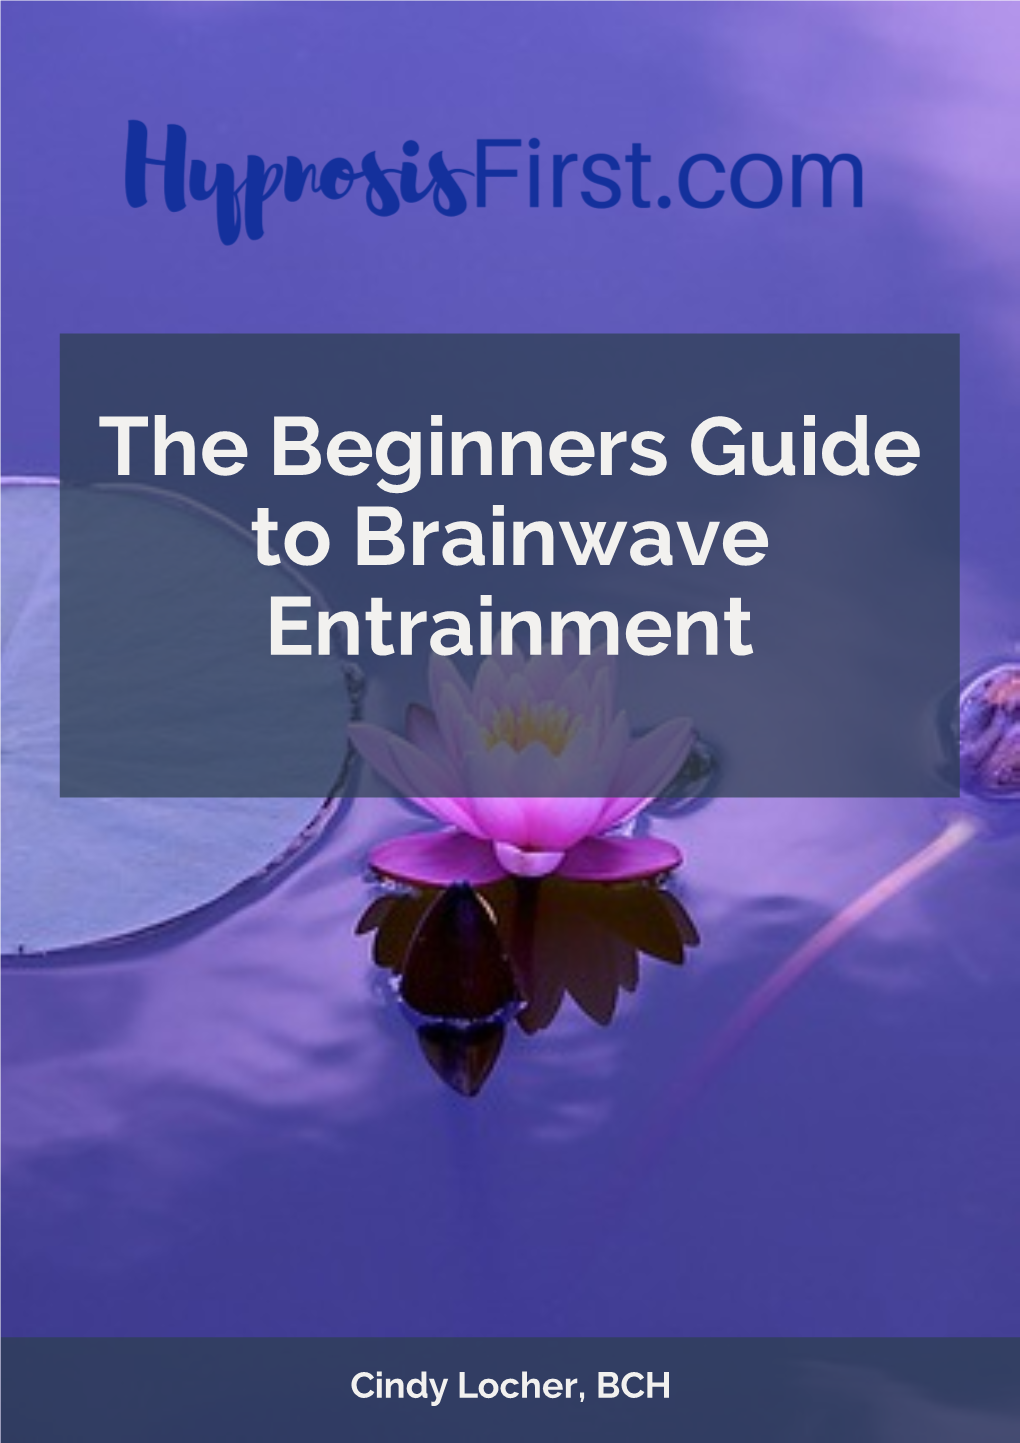 The Beginners Guide to Brainwave Entrainment